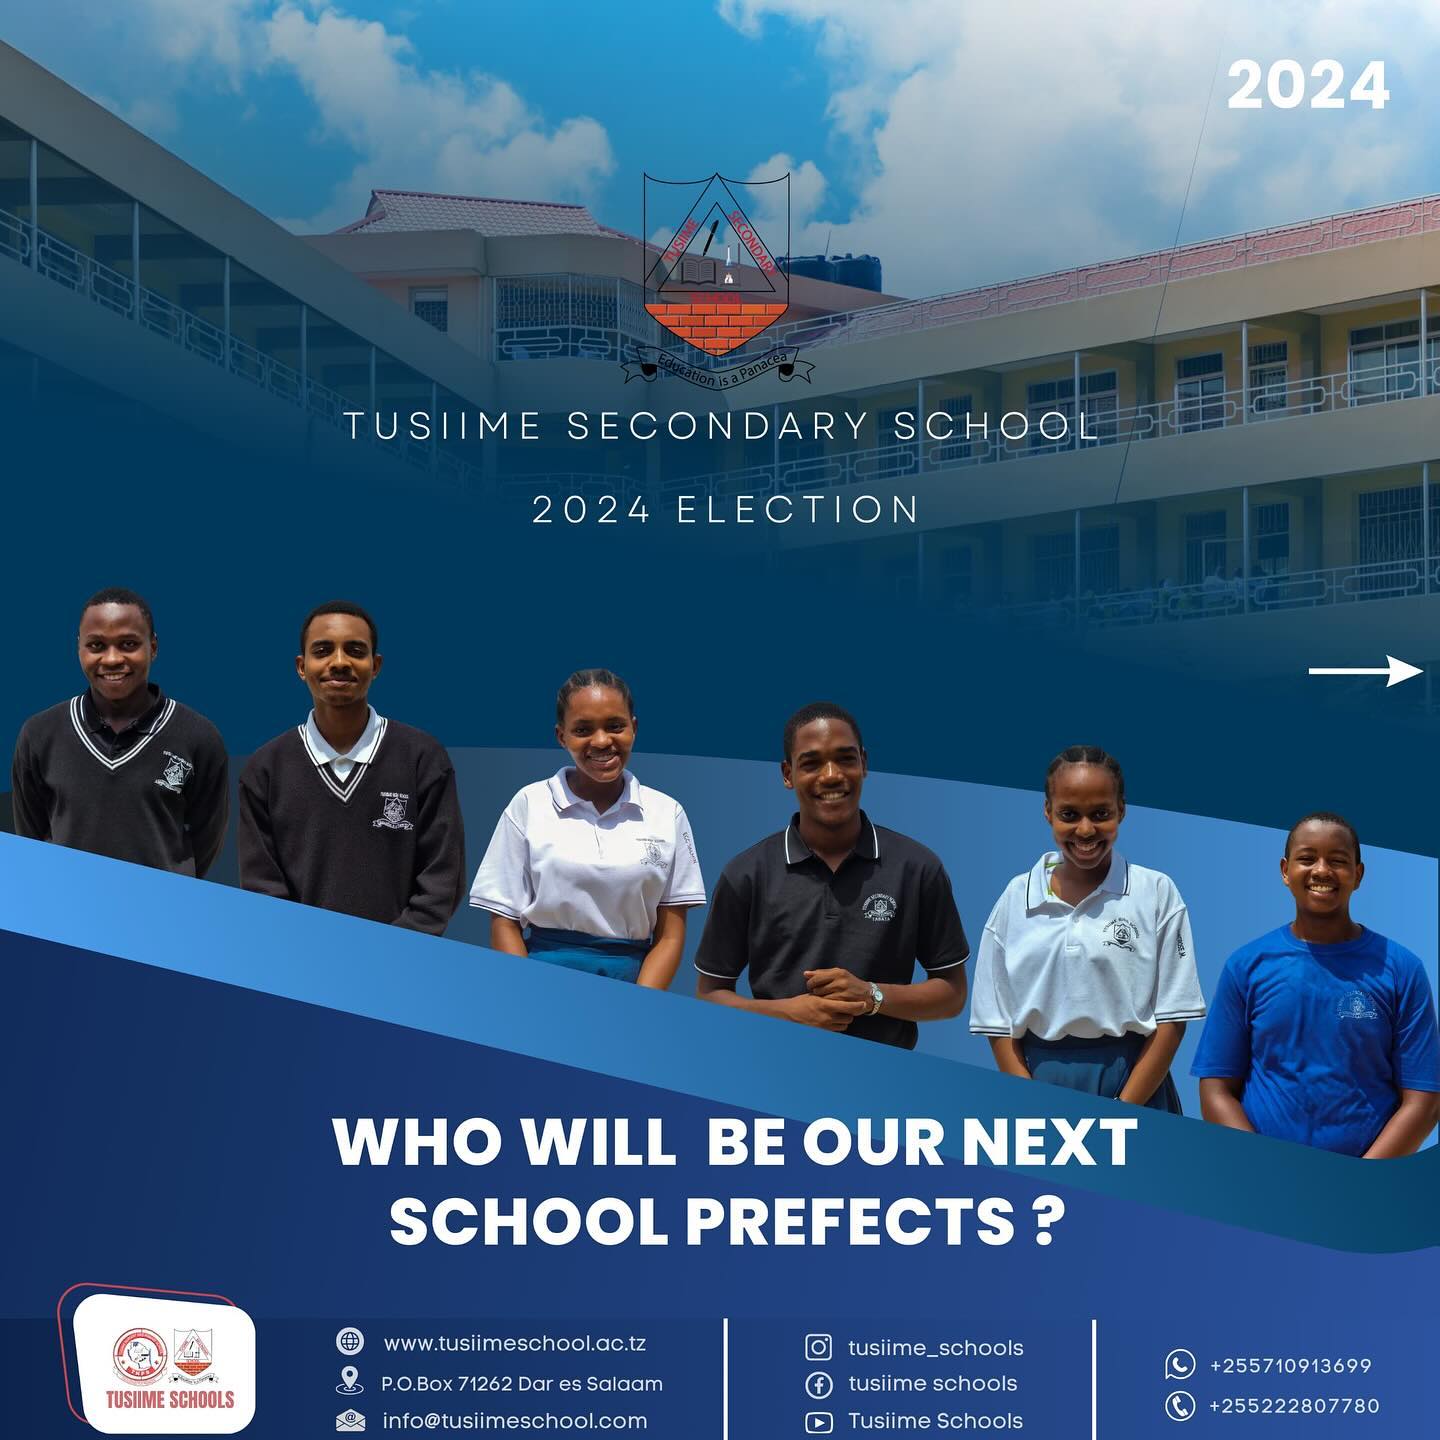 Big announcement! 📣 We’re stepping into the race for this year’s school elections! This is more than just a campaign; it’s about bringing our voices together for a brighter, more inclusive future at school. Ready to make an impact and excited to have your support. Let’s embark on this journey together and turn our vision into reality! #ElectionTime #TogetherWeCan 💪🎓 #tusiime #tusiimeschools #tusiimesecondaryschool #tusiimeprimaryschool